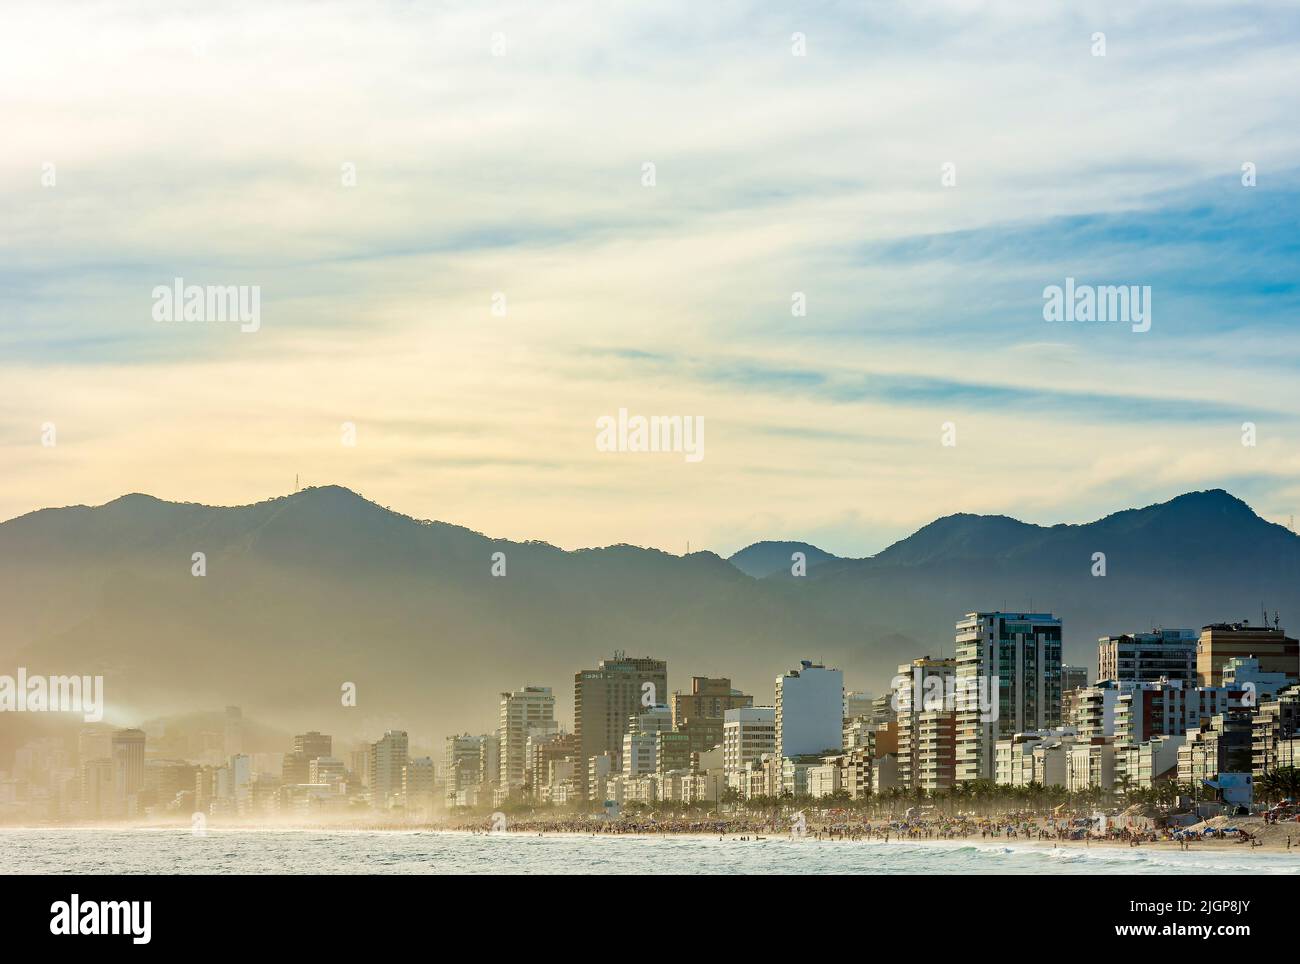 Residential buildings on the seafront of Ipanema beach in Rio de Janeiro during sunset Stock Photo